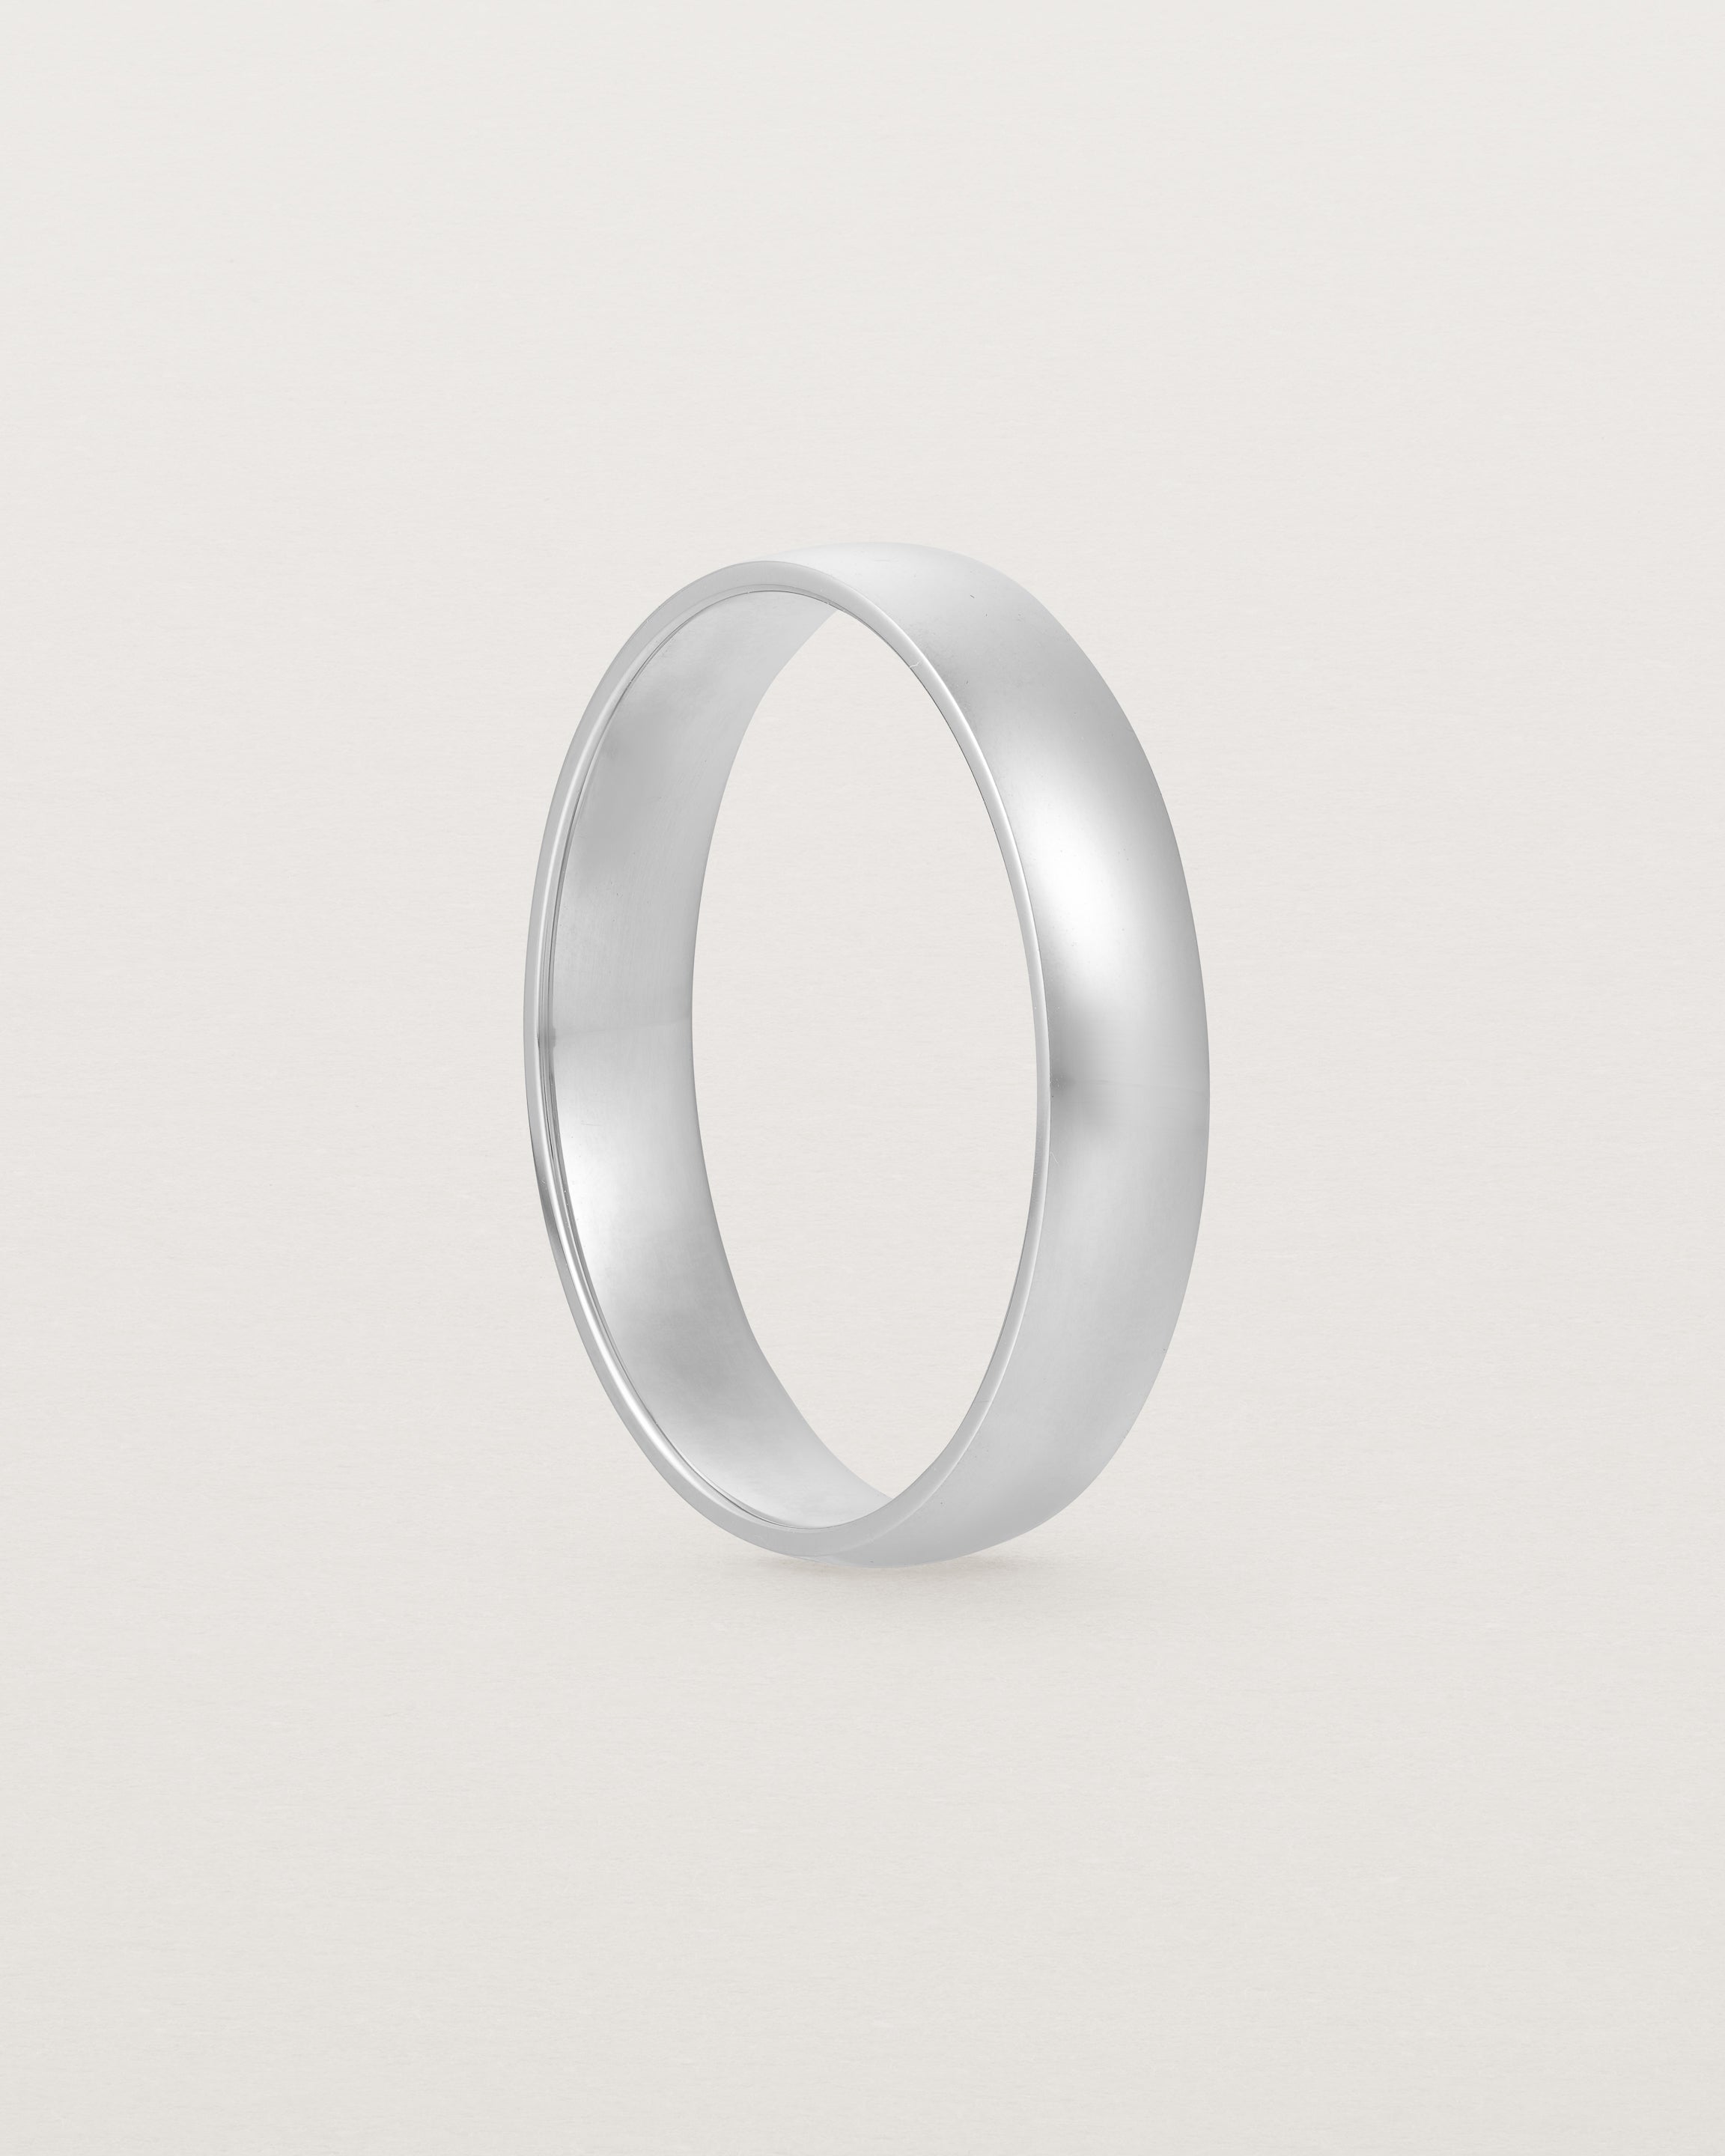 A classic 4mm wedding band crafted in white gold